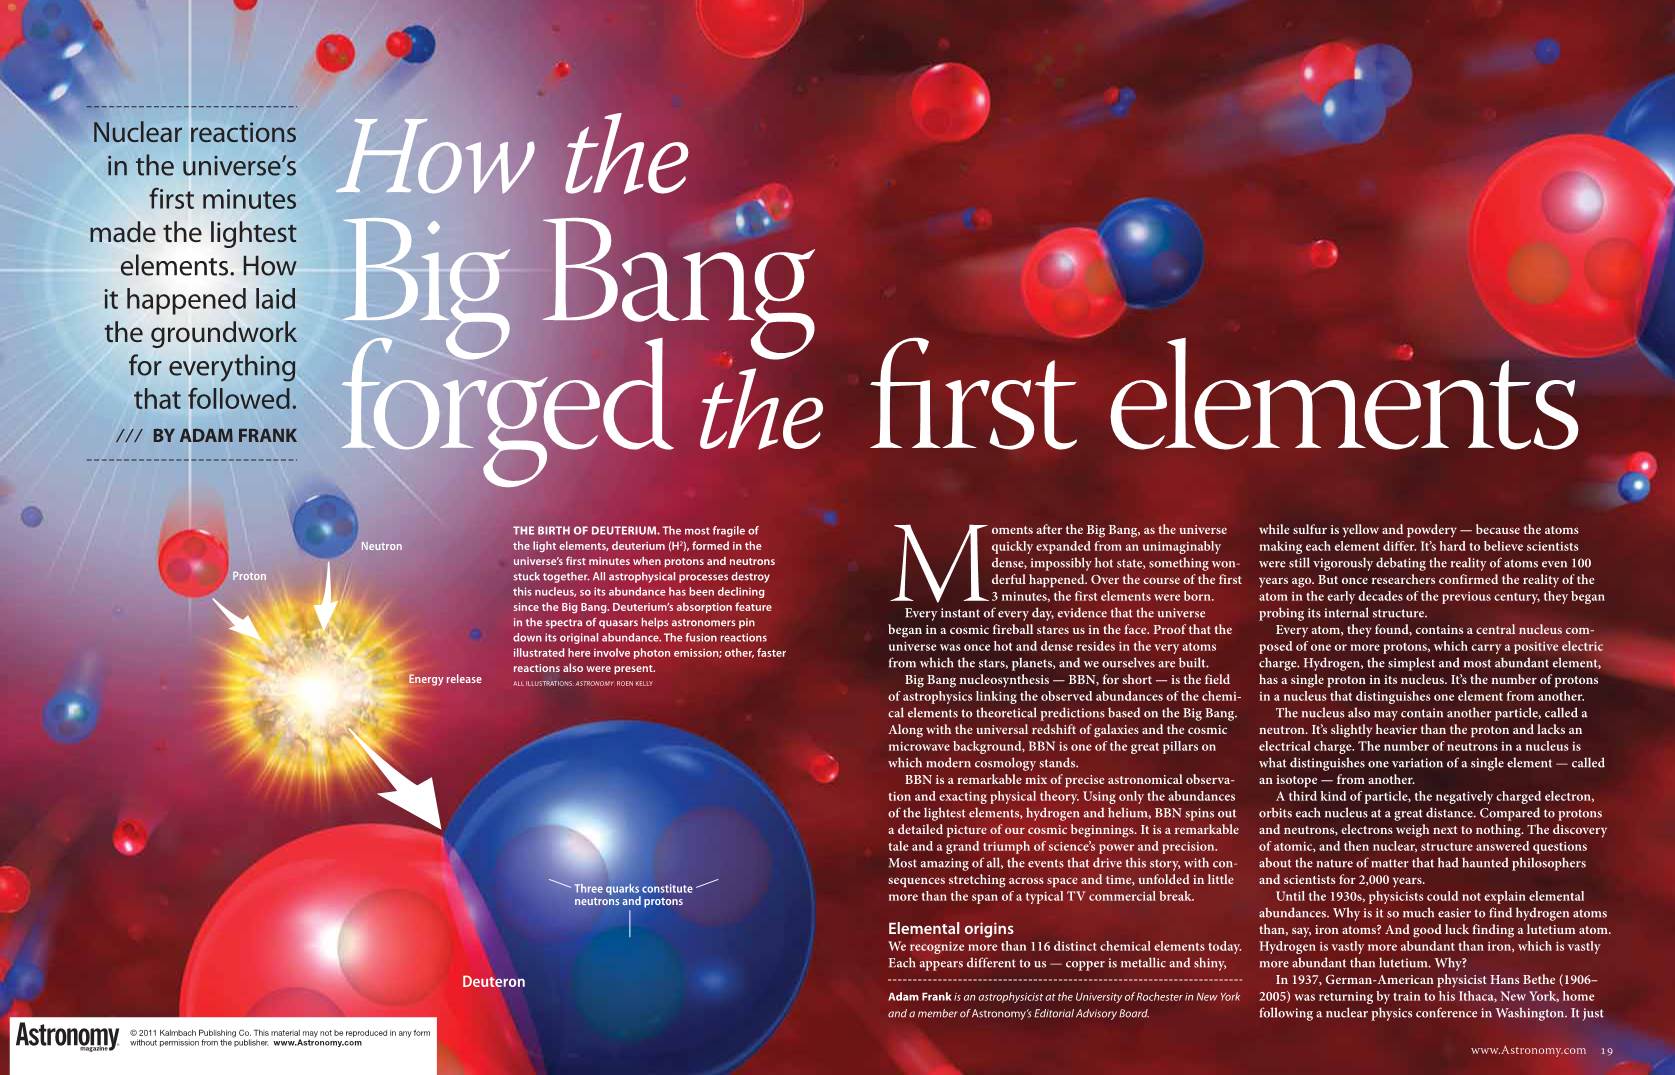 Big Bang Forgedthe First Elements